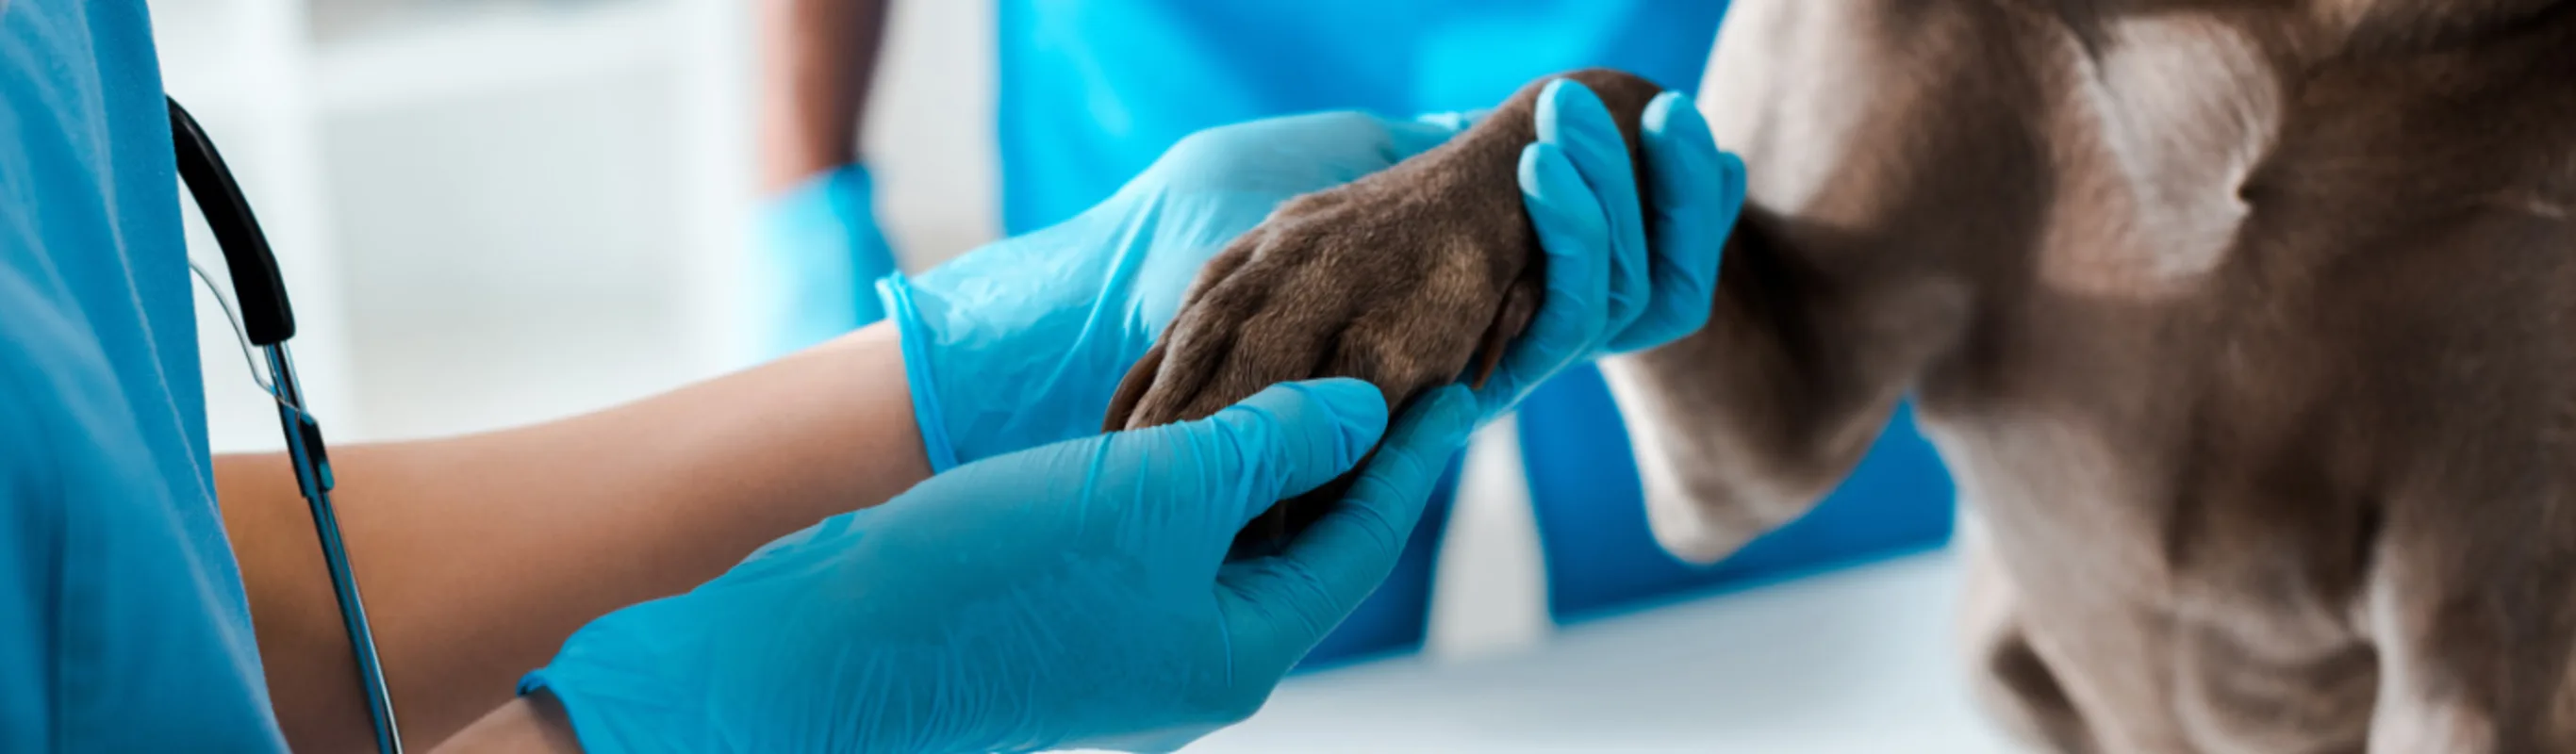 Veterinarian Holding a Dog's Paw